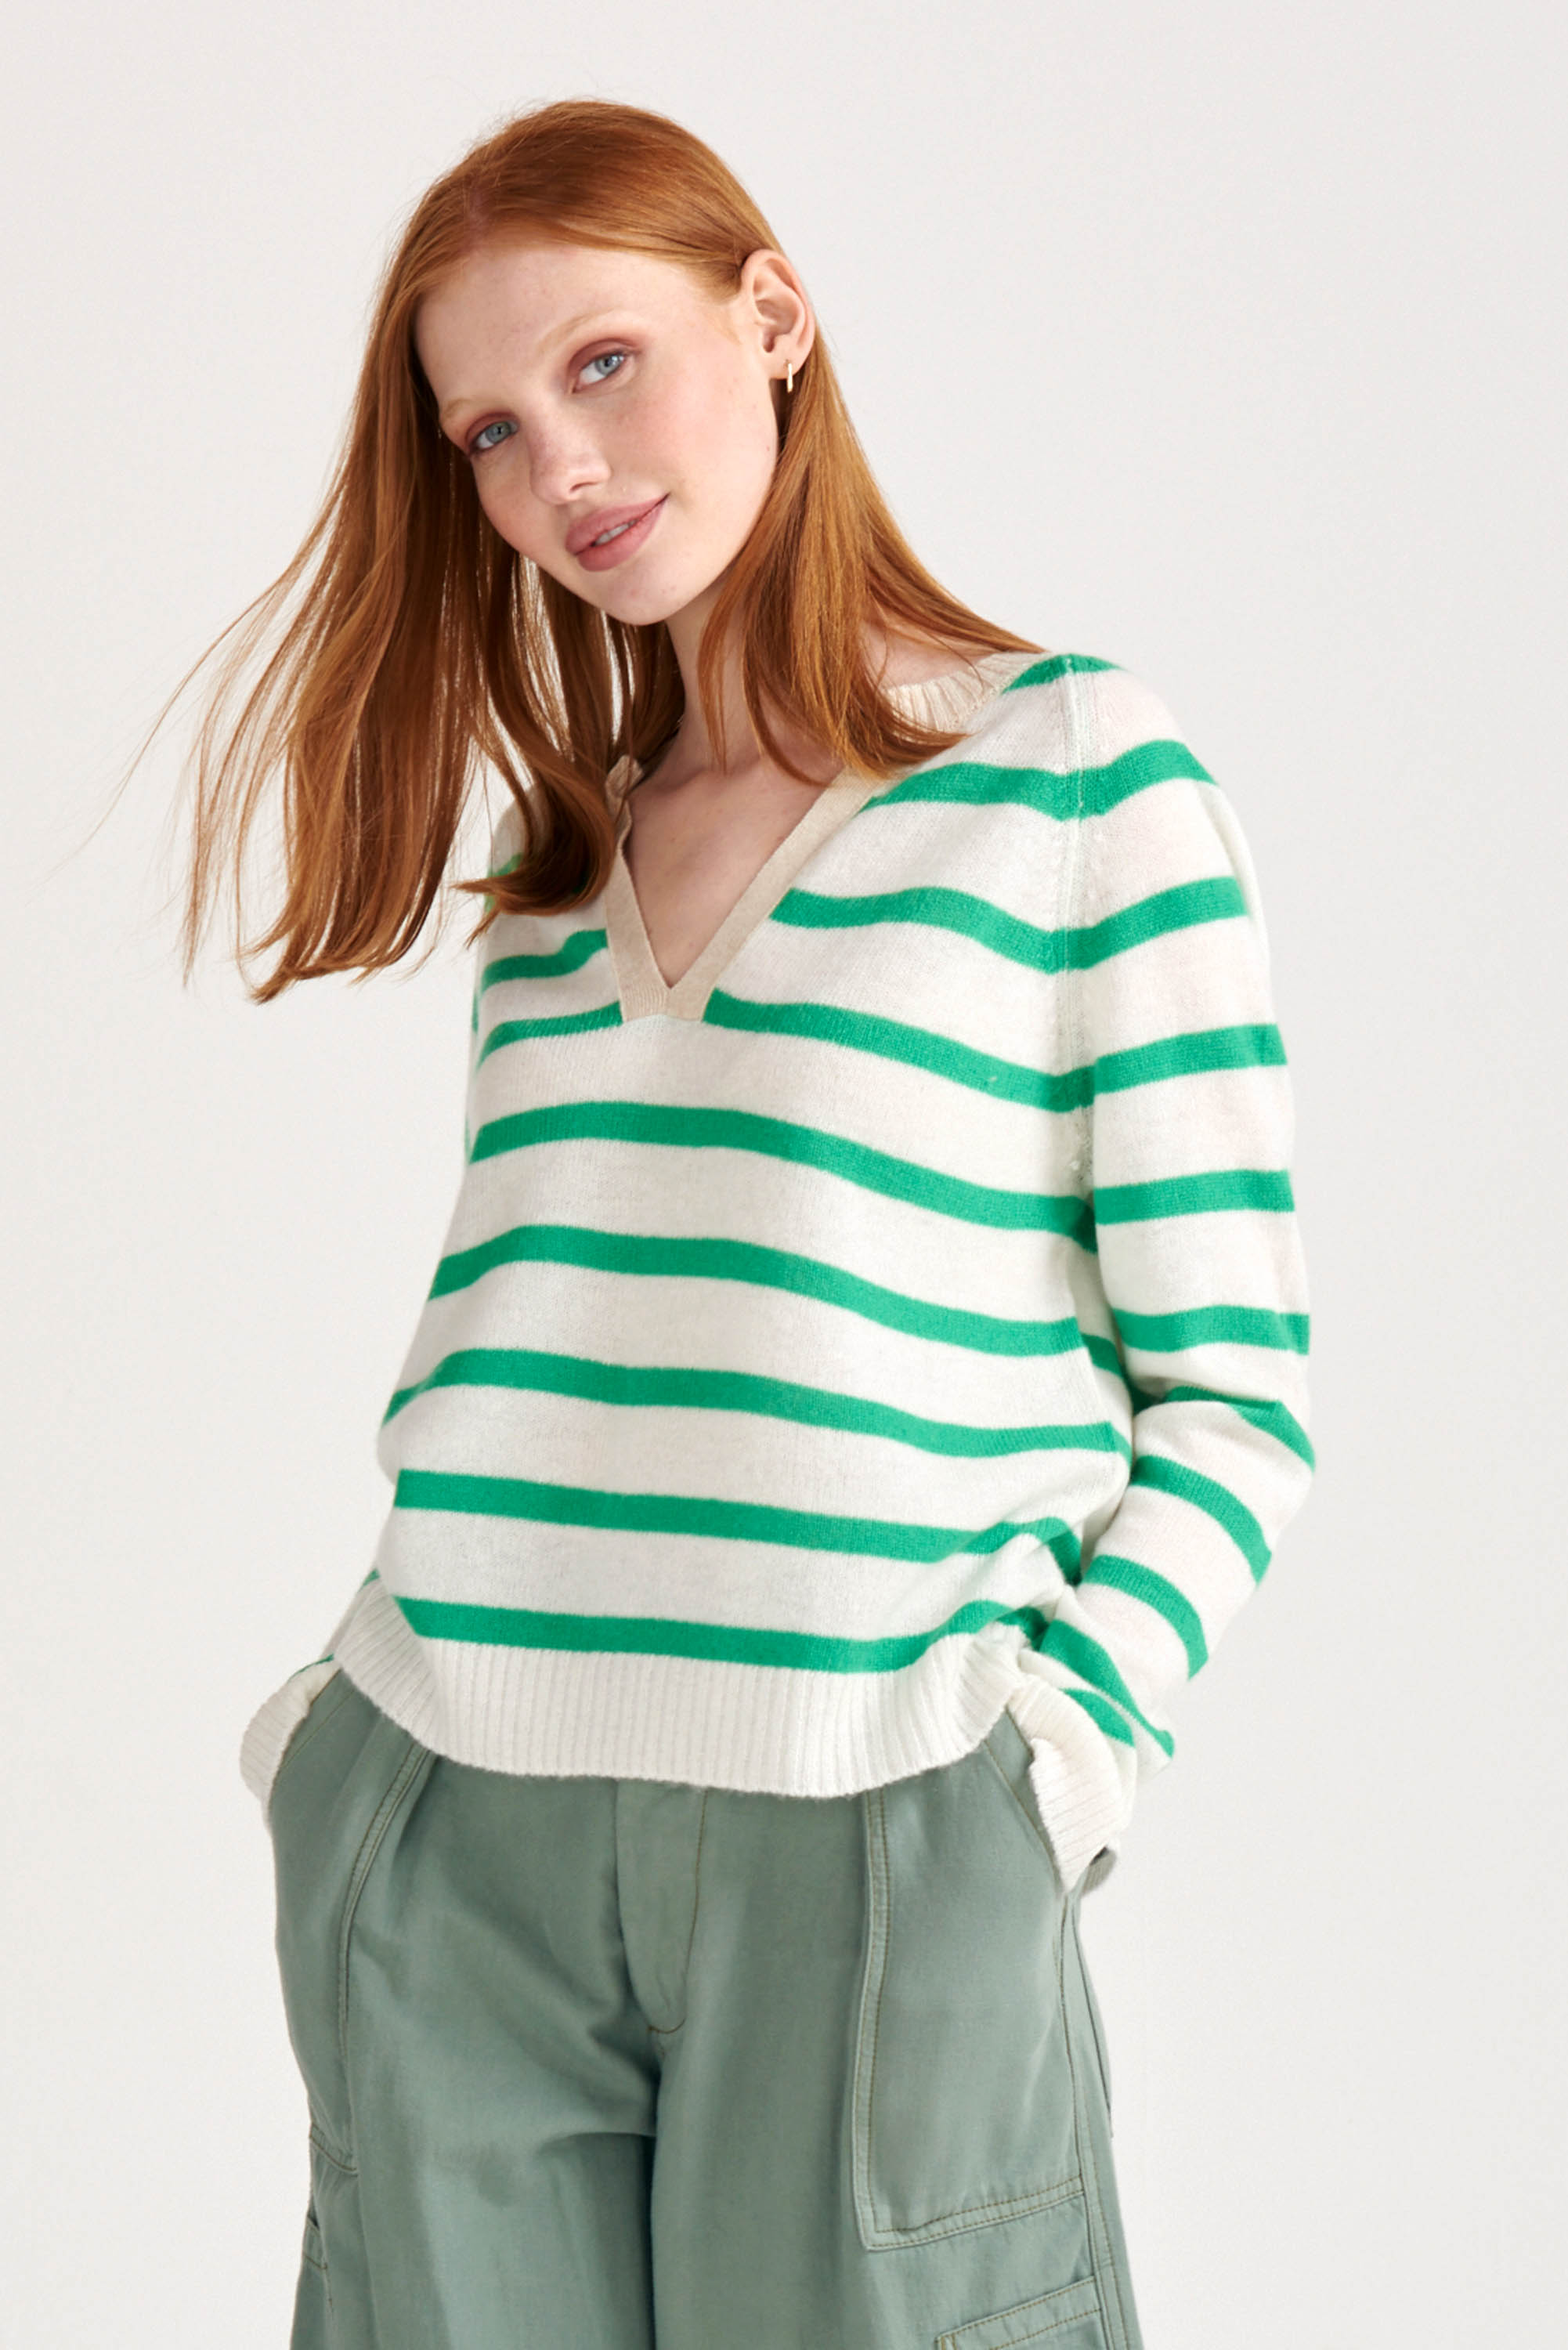 Red haired female model wearing Jumper1234 Bright green and cream stripe cashmere jumper with open collar in contrast oatmeal